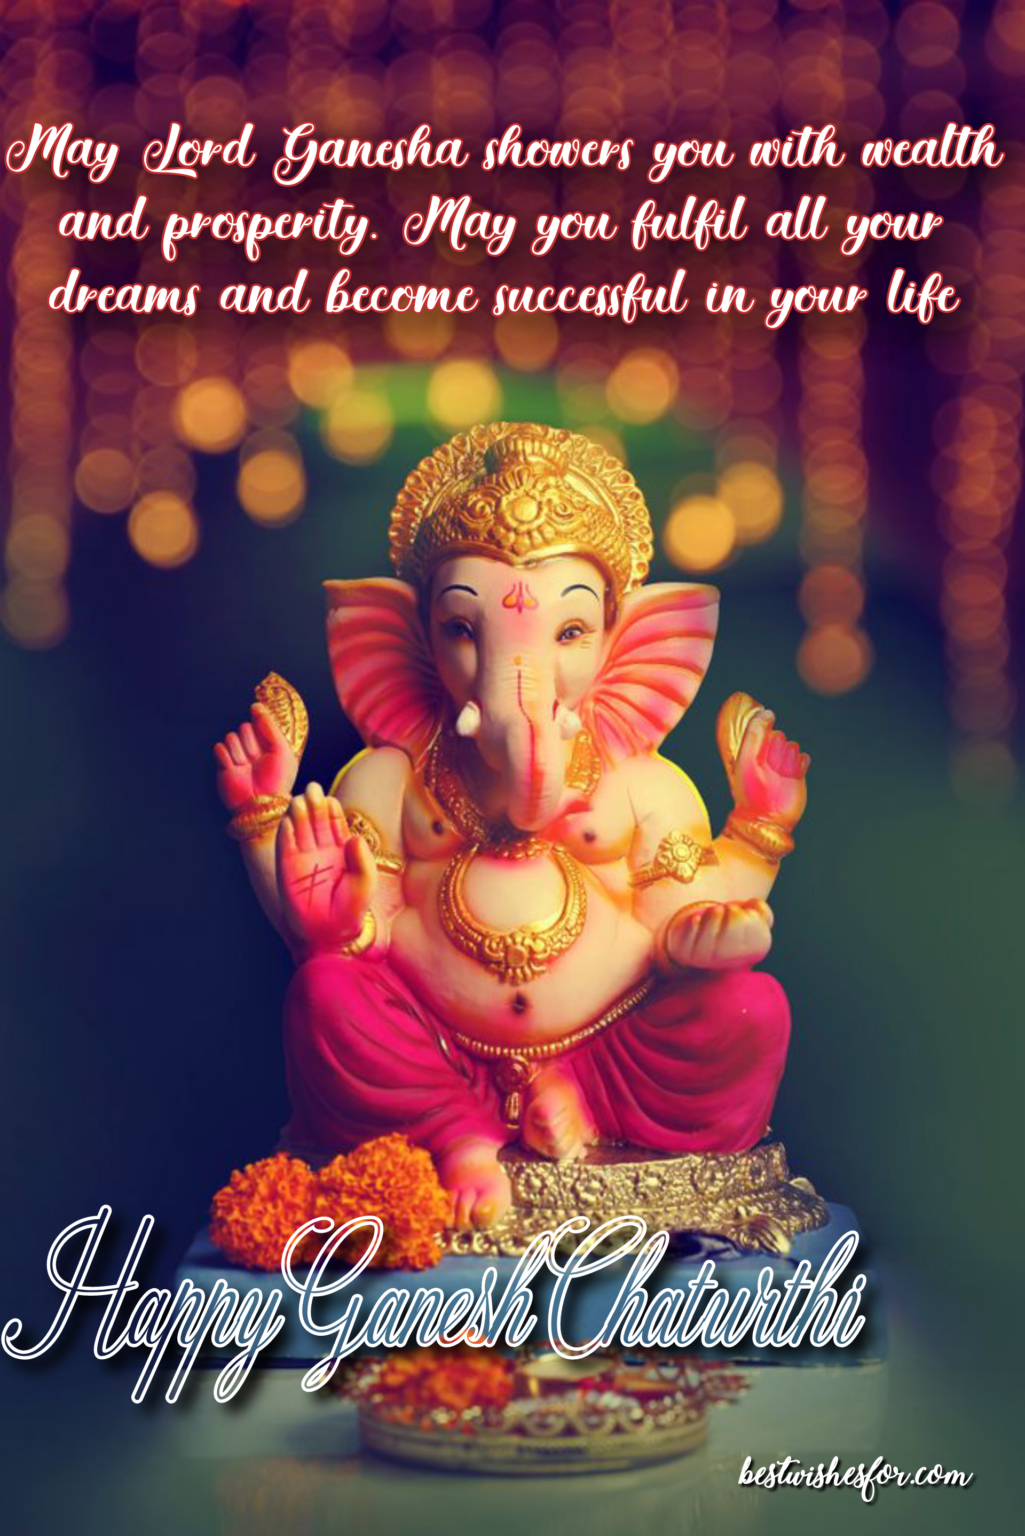 Happy Ganesh Chaturthi 2021 Wishes Quotes Images Messages And Sayings Best Wishes 7955